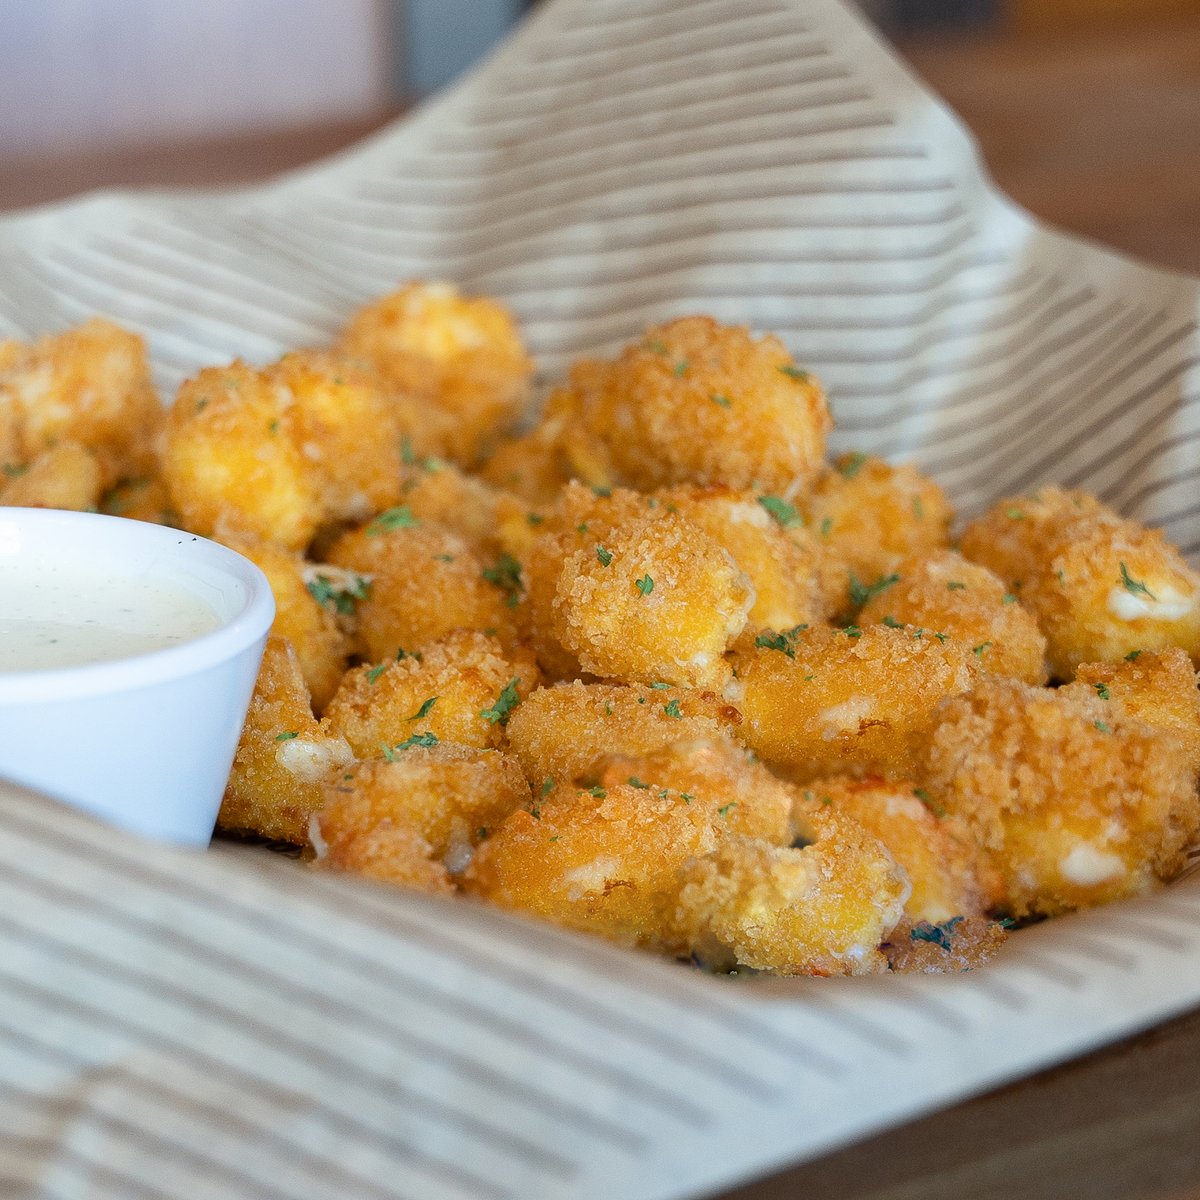 Happiness is little pillows of fried cheese. Prove us wrong.